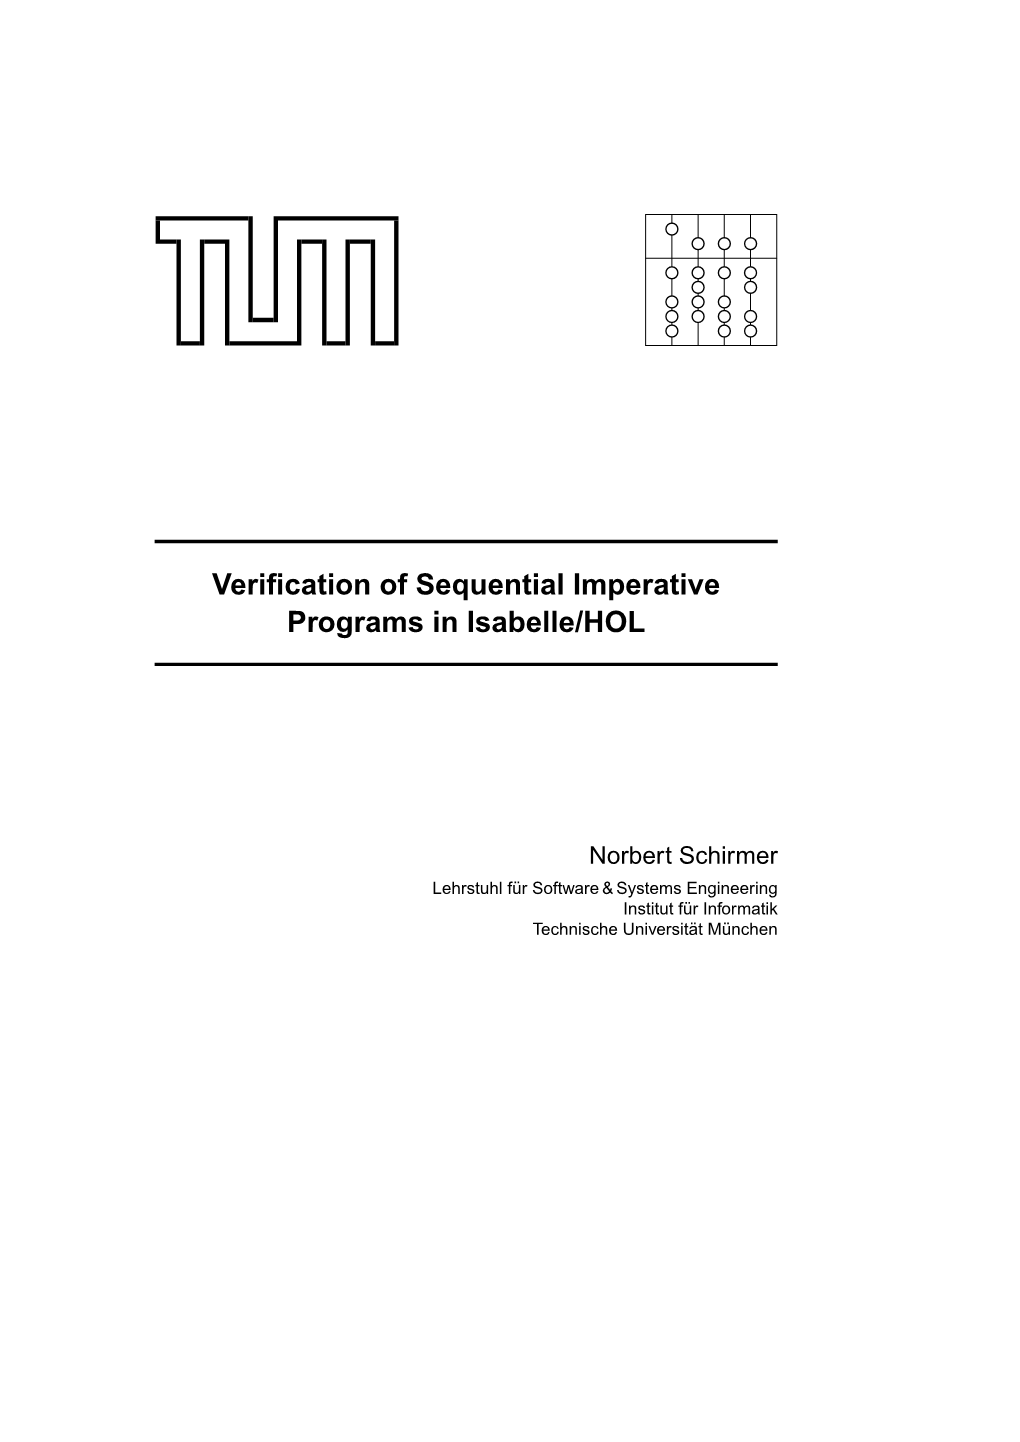 Verification of Sequential Imperative Programs in Isabelle/HOL